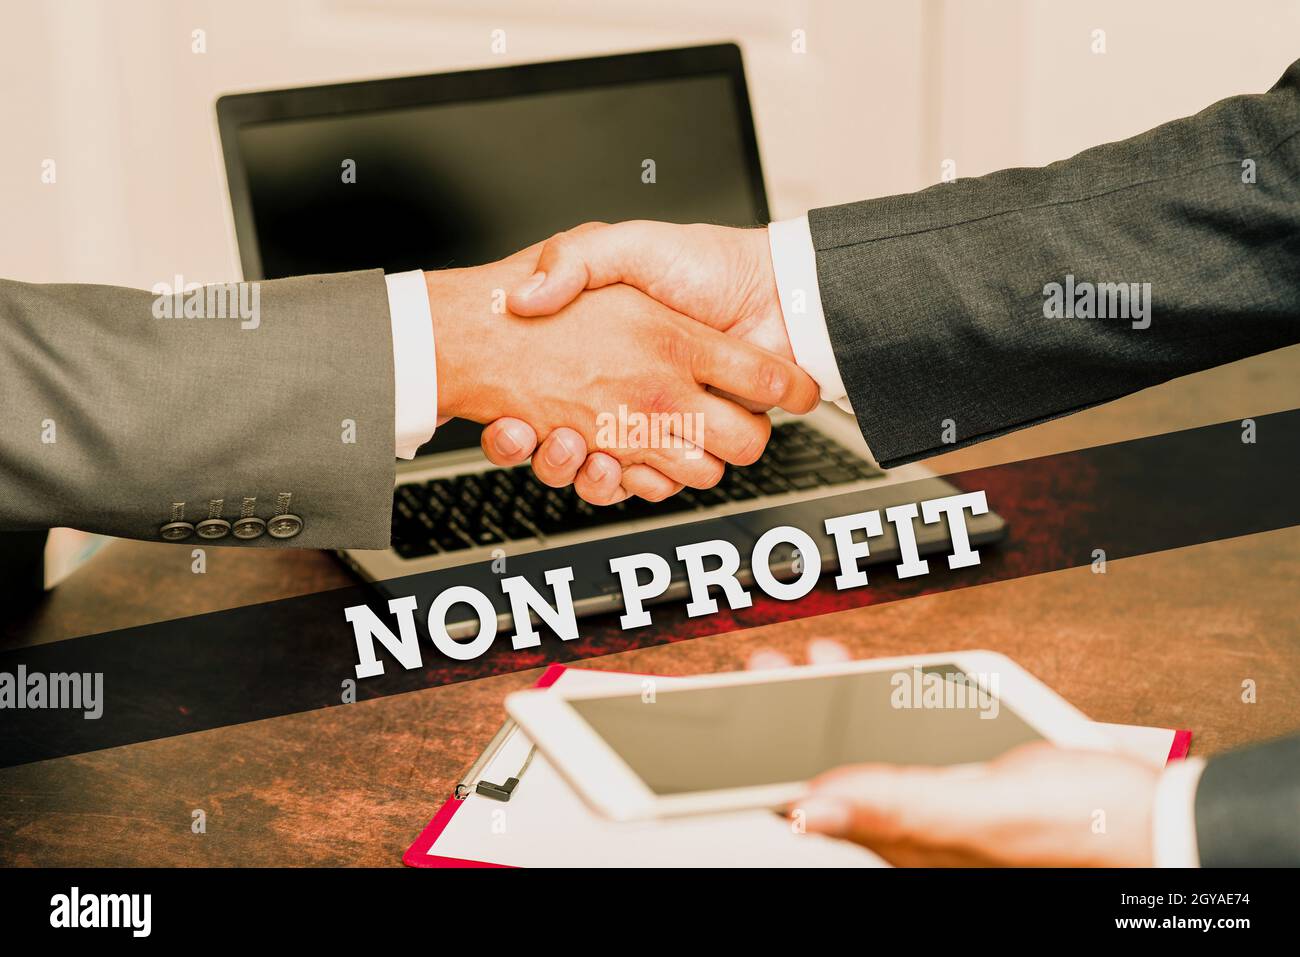 Sign displaying Non Profit, Business concept an activity not making or conducted primarily for a profit Two Professional Well-Dressed Corporate Busine Stock Photo